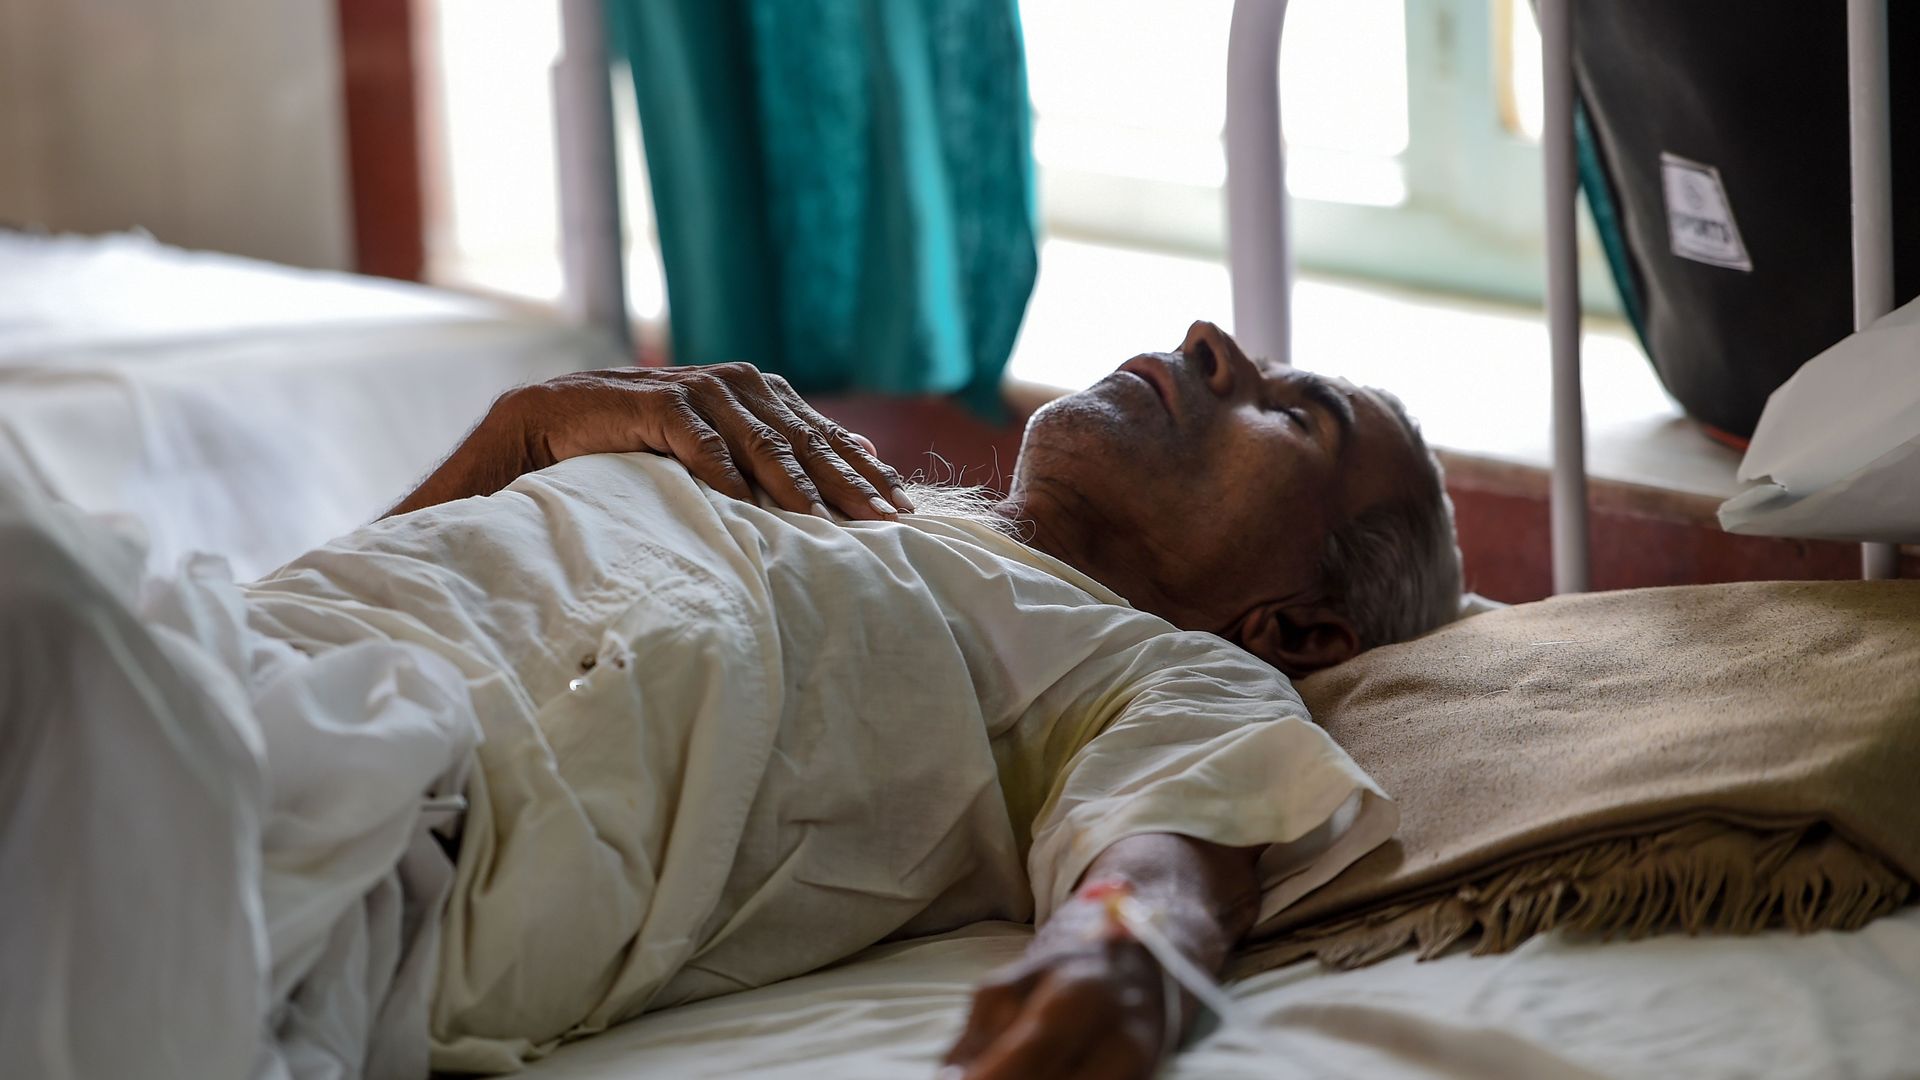 An Indian patient lies on a bed at a government hospital after suffering heat stroke in 2019.